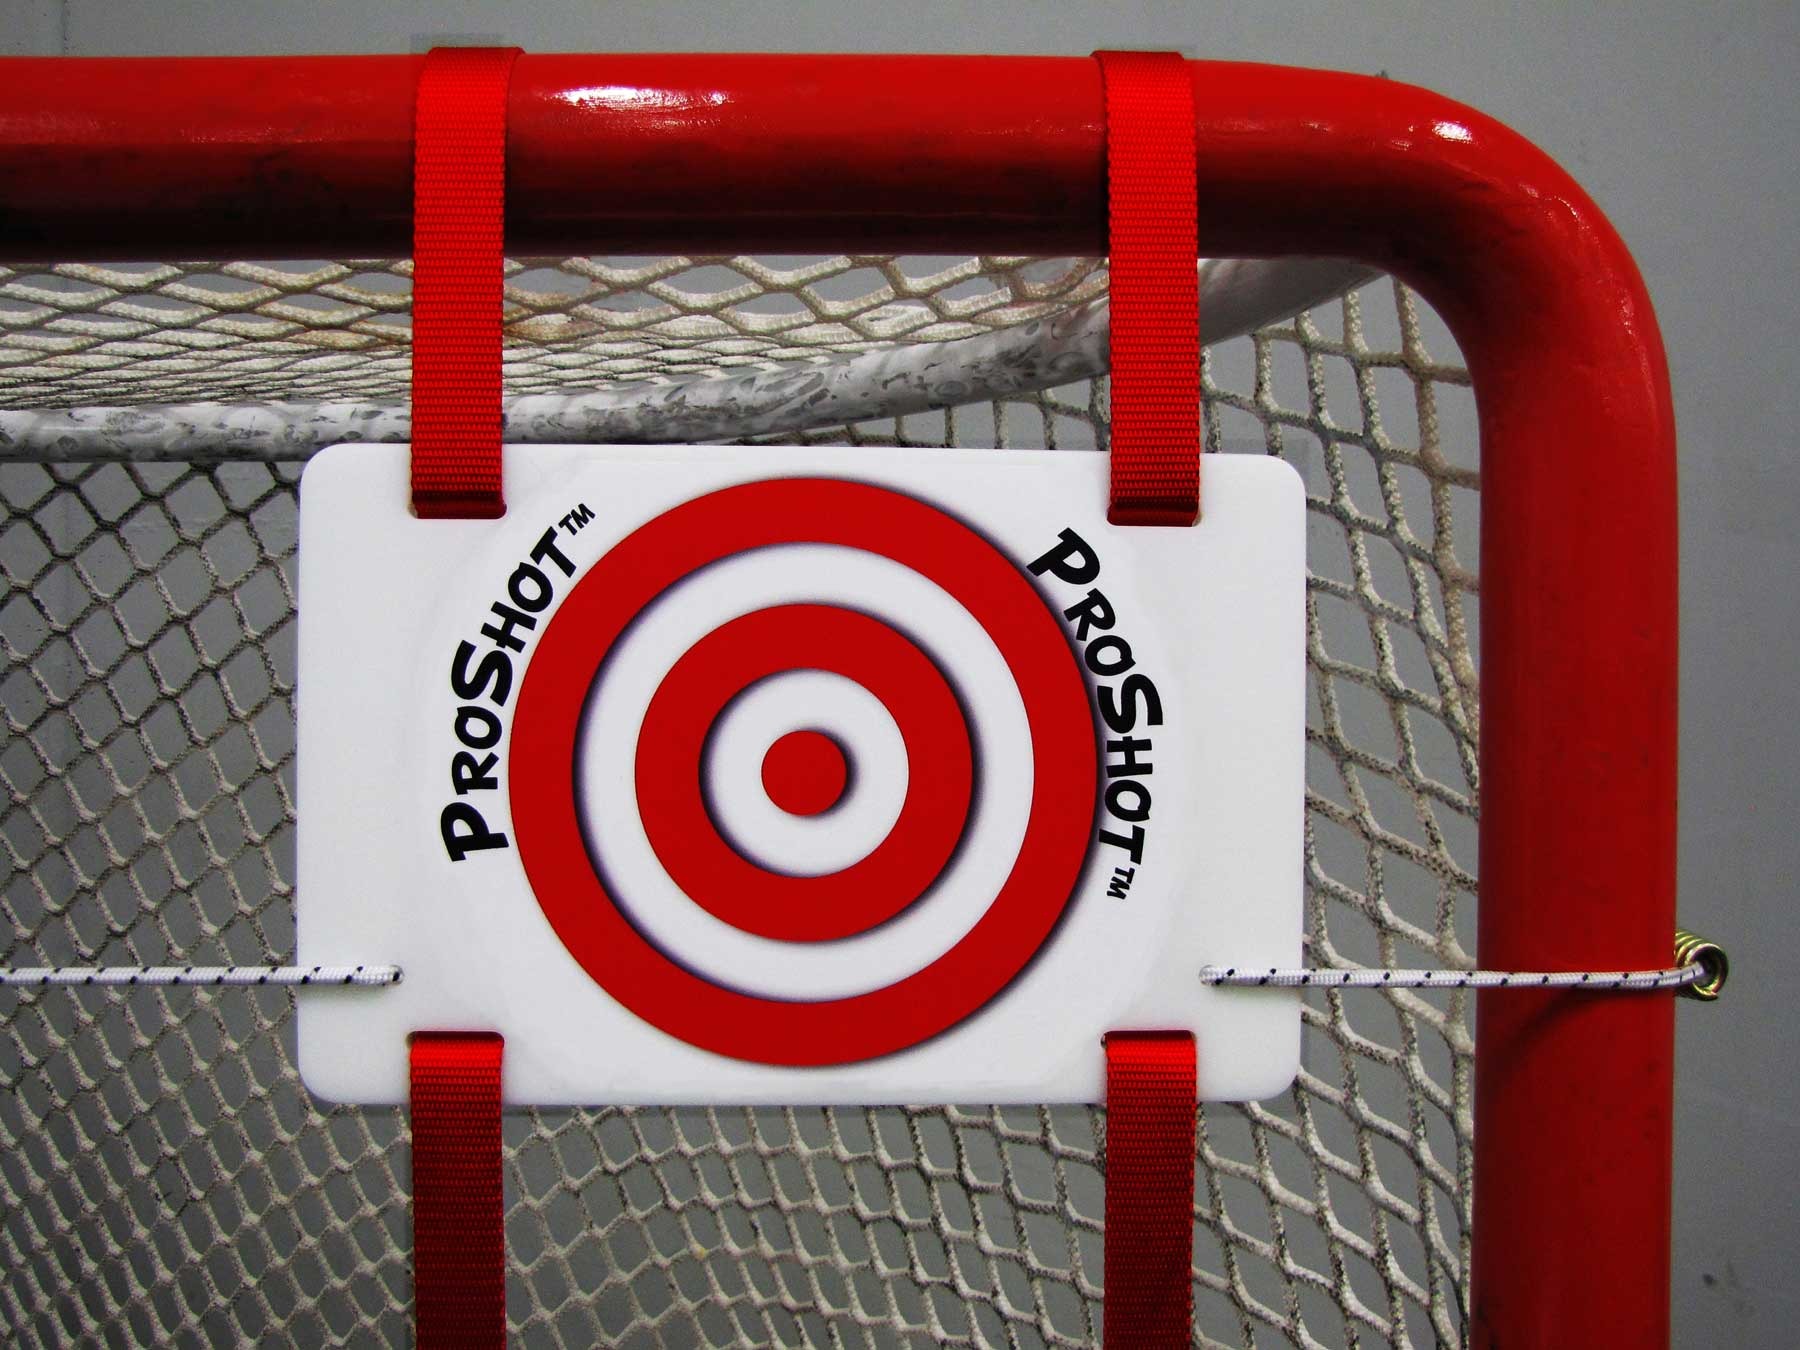 Hockey Shooting Targets for Players 12 and Under; 1/4” Thick High-Density Polyethylene with Adjustable 1” Web Straps with Tensile Strength of 1000 lbs.